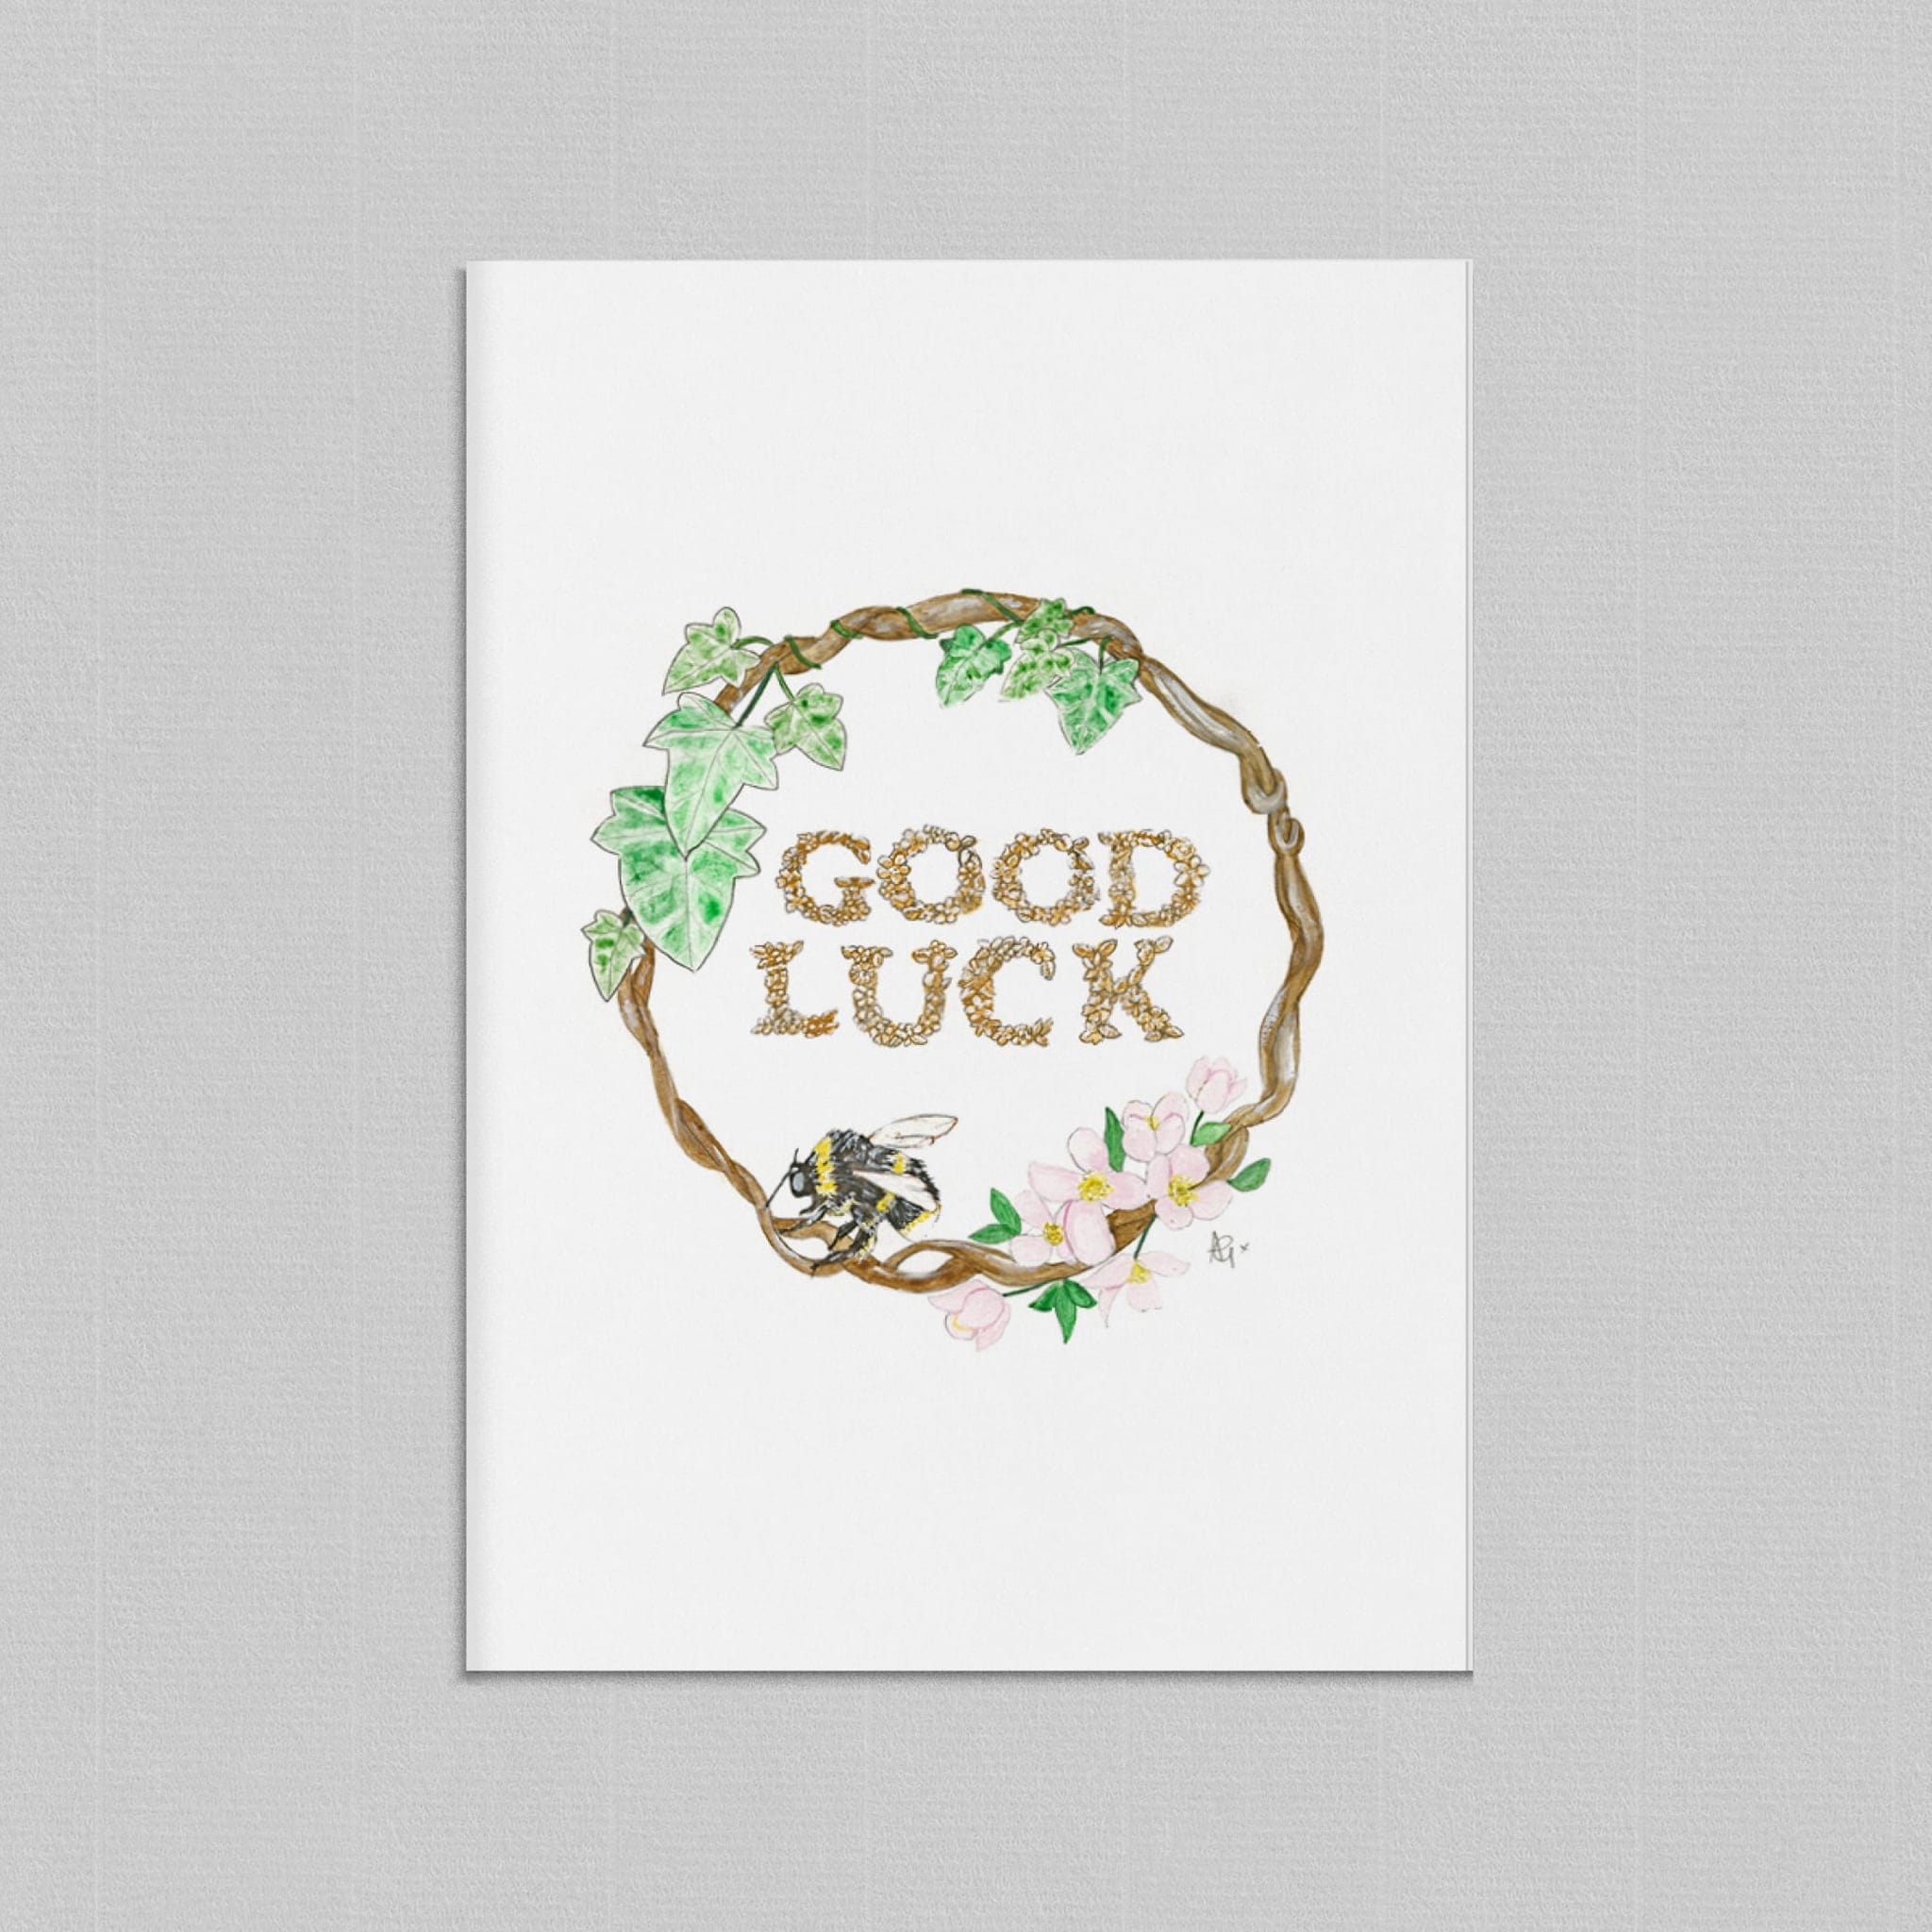 Good Luck Illustrated Greetings Card